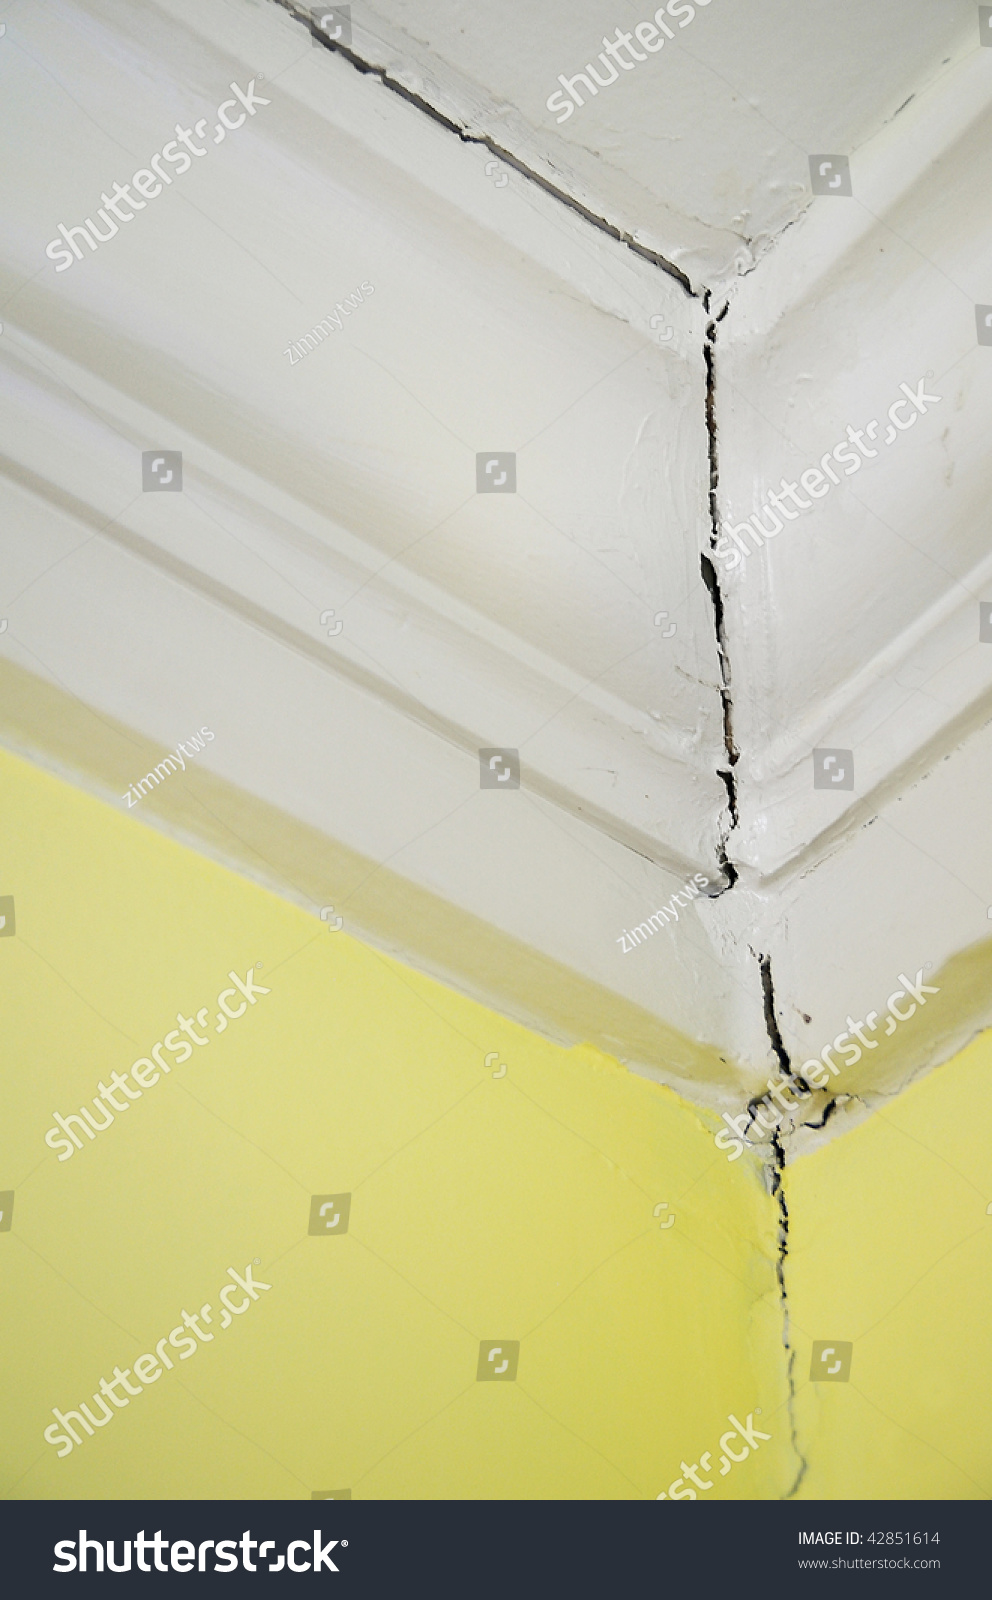 Crack Ceiling Wall Joint Home Stock Photo Edit Now 42851614